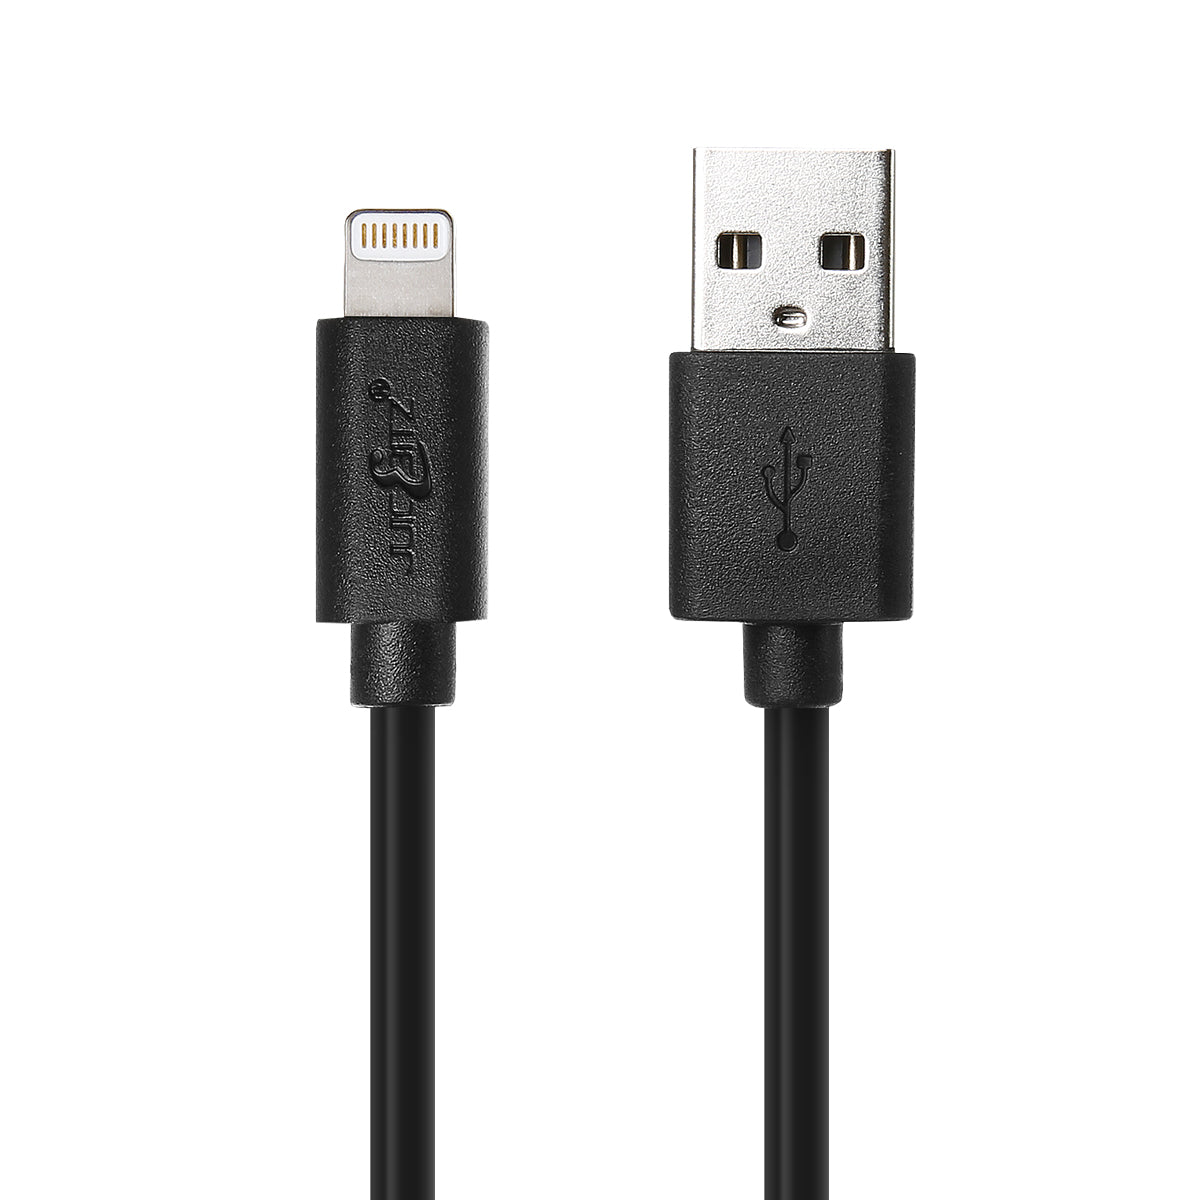 USB Charger Cable Data Sync Lead for iPhone, iPad, iPod - Black